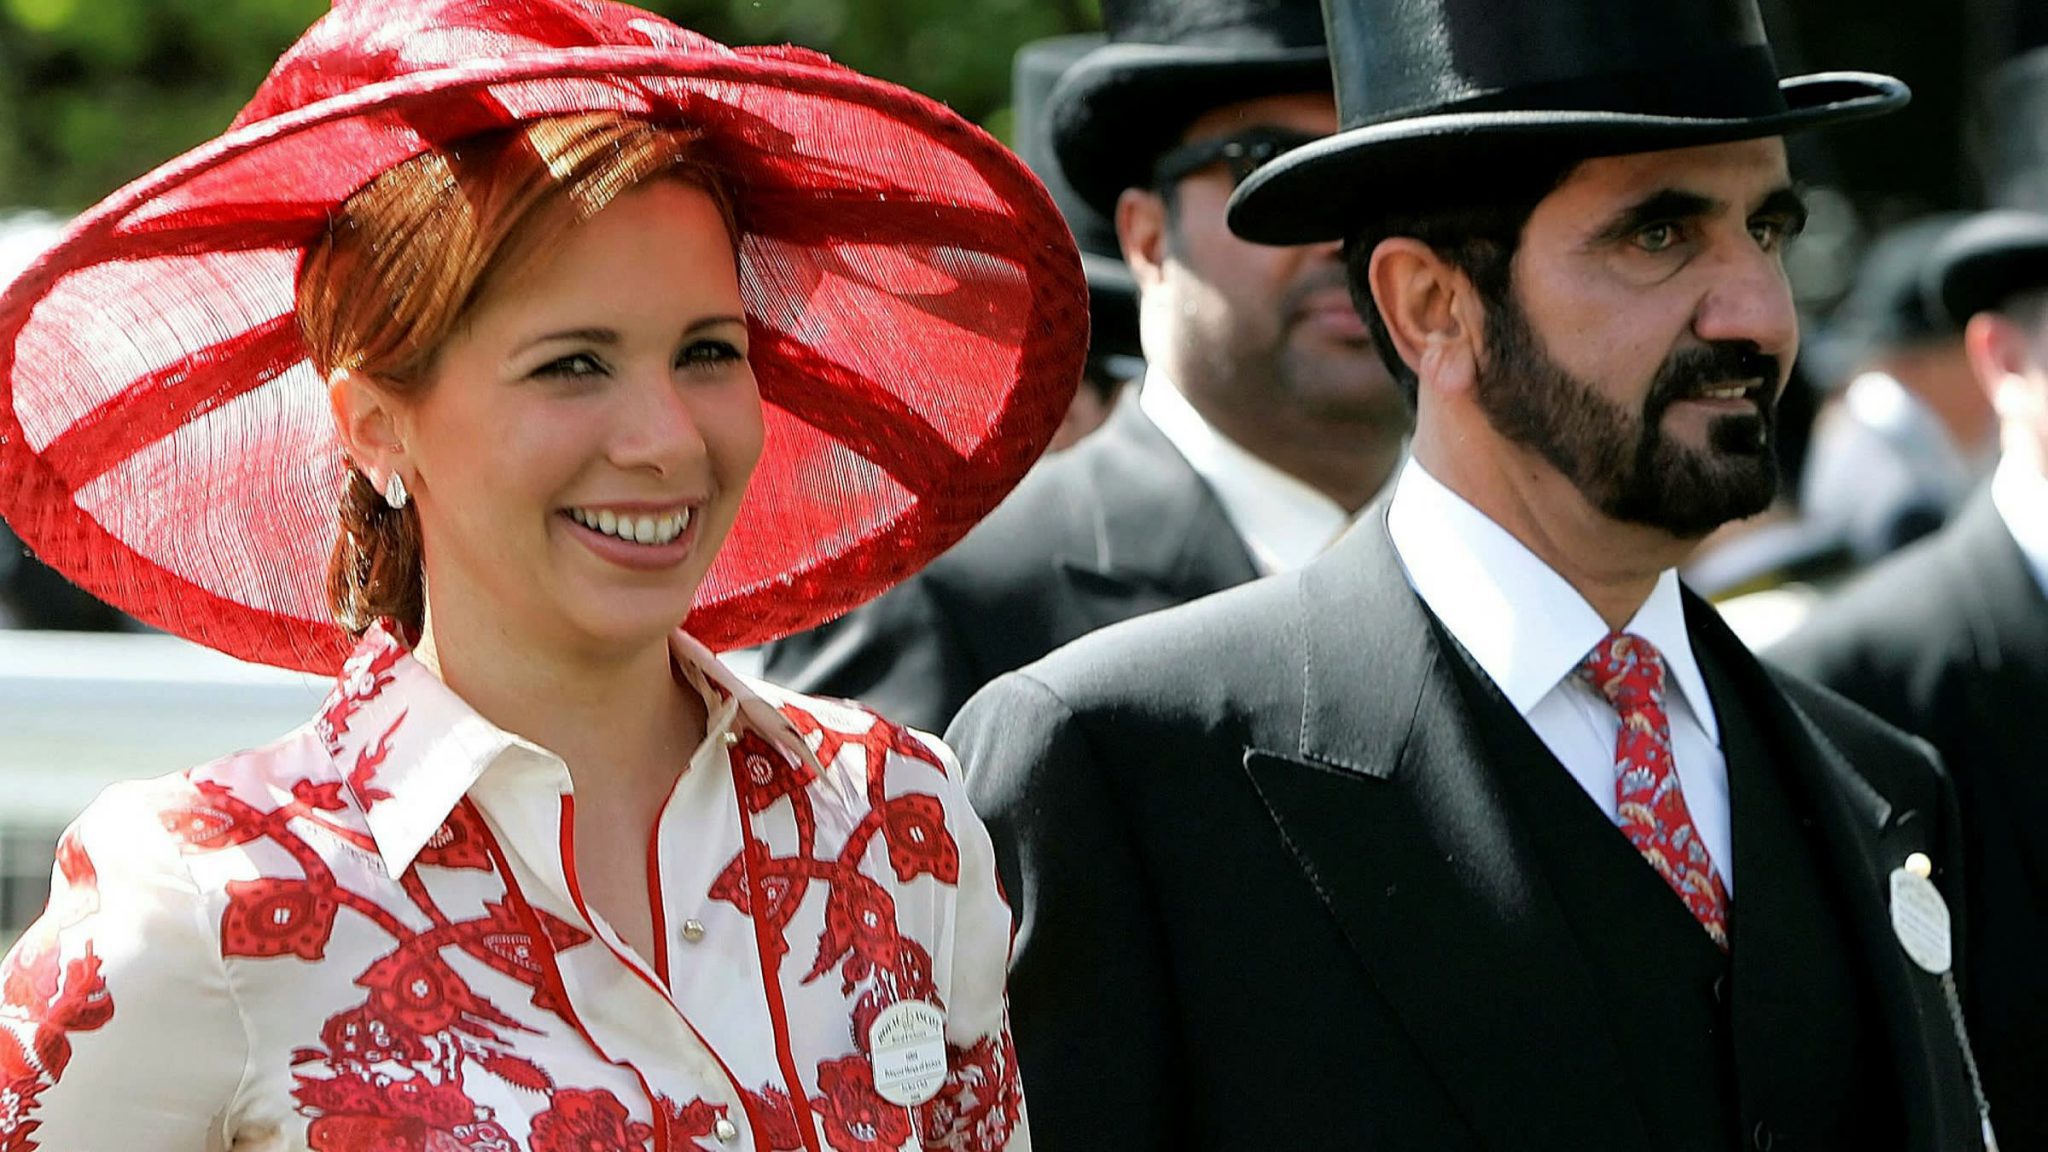 Dubai ruler’s ‘campaign of fear and intimidation’ against Princess Haya